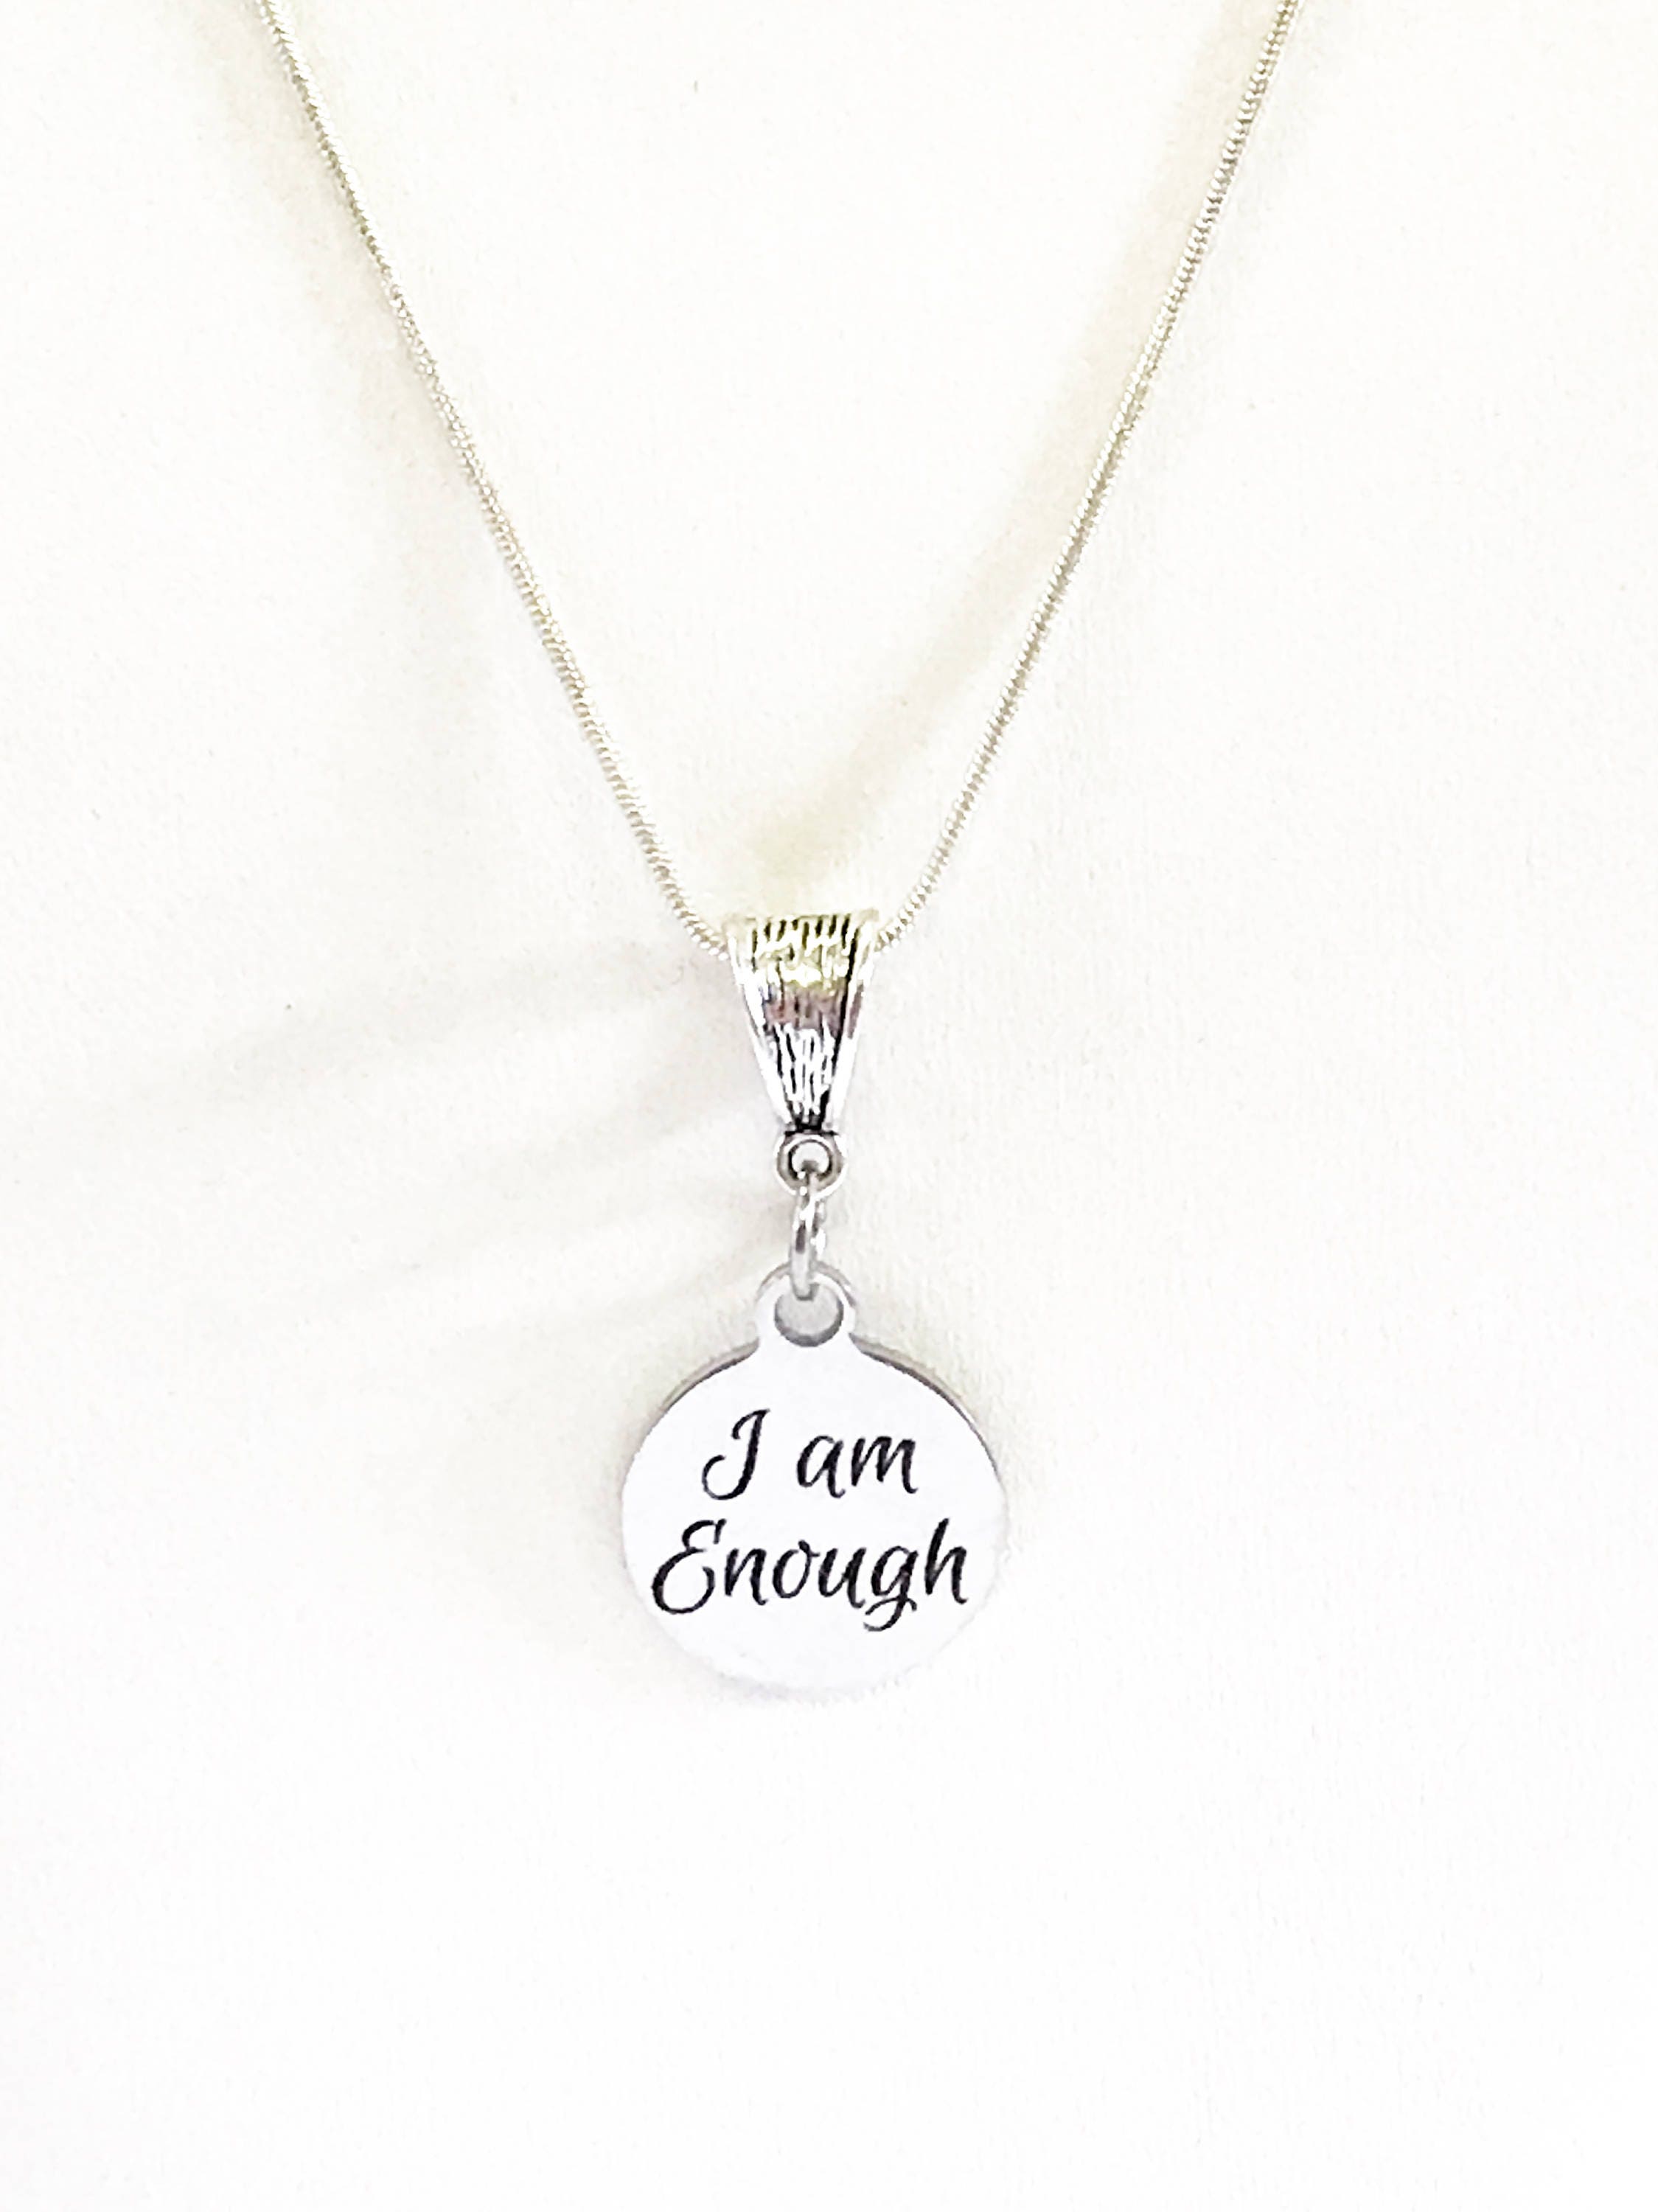 I am enough Necklace, I am Worthy necklace, Self Love Necklace, Anxiety  Depression Motivation Necklace, Positive Affirmation - Etsy Portugal